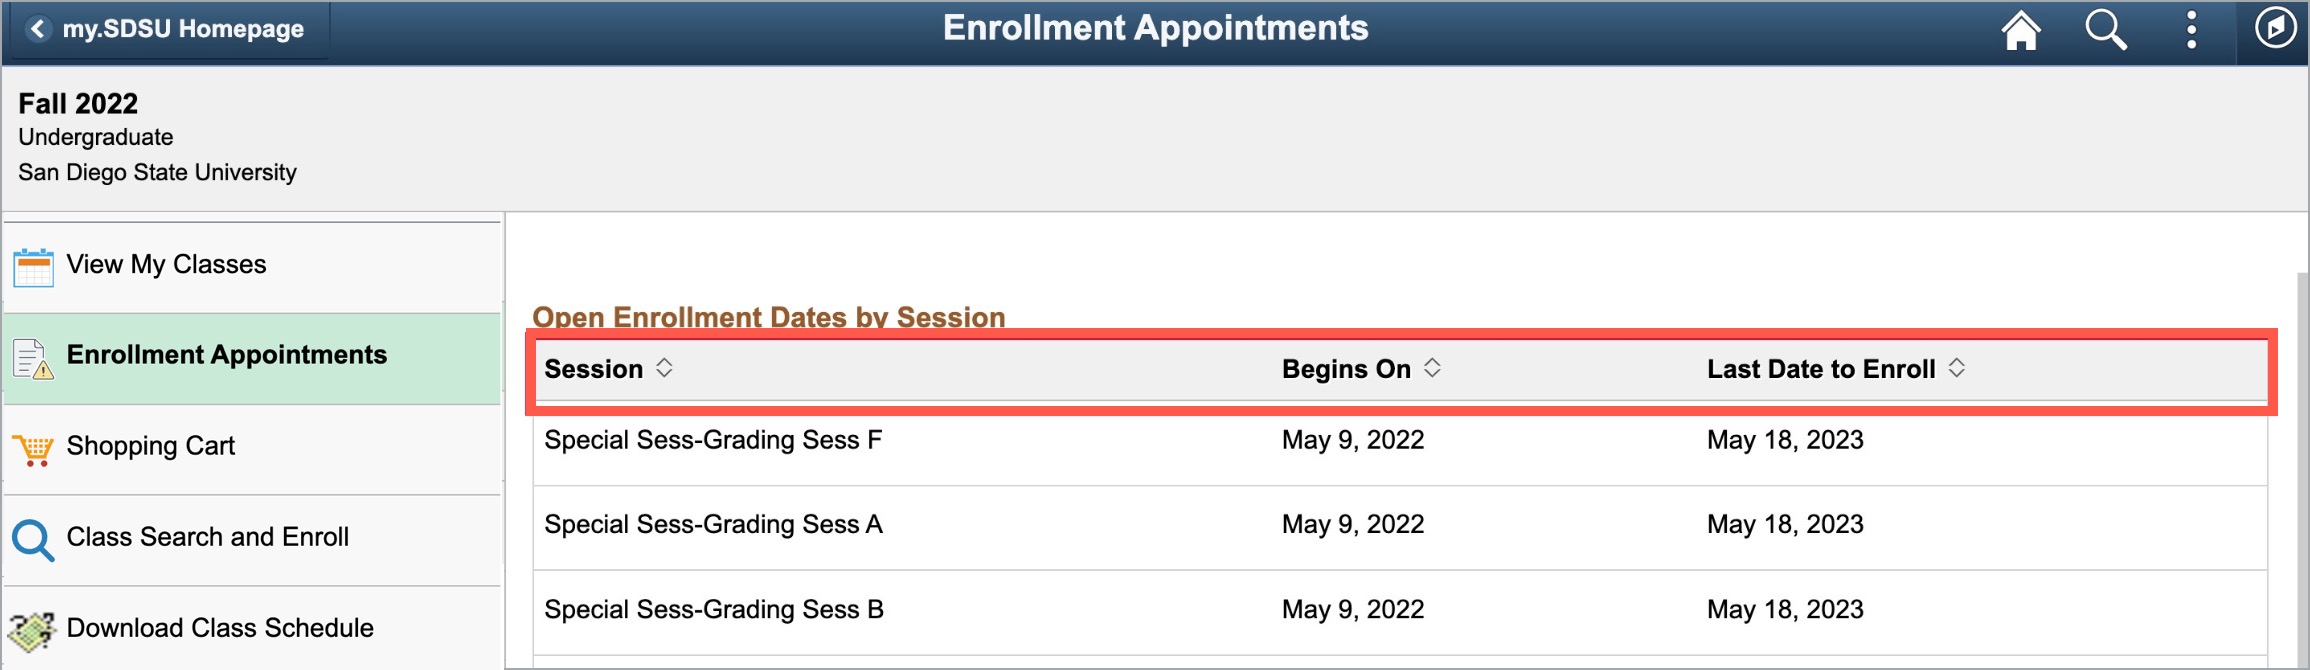 Enrollment Appointments for Global Campus appear under "Special Sessions".